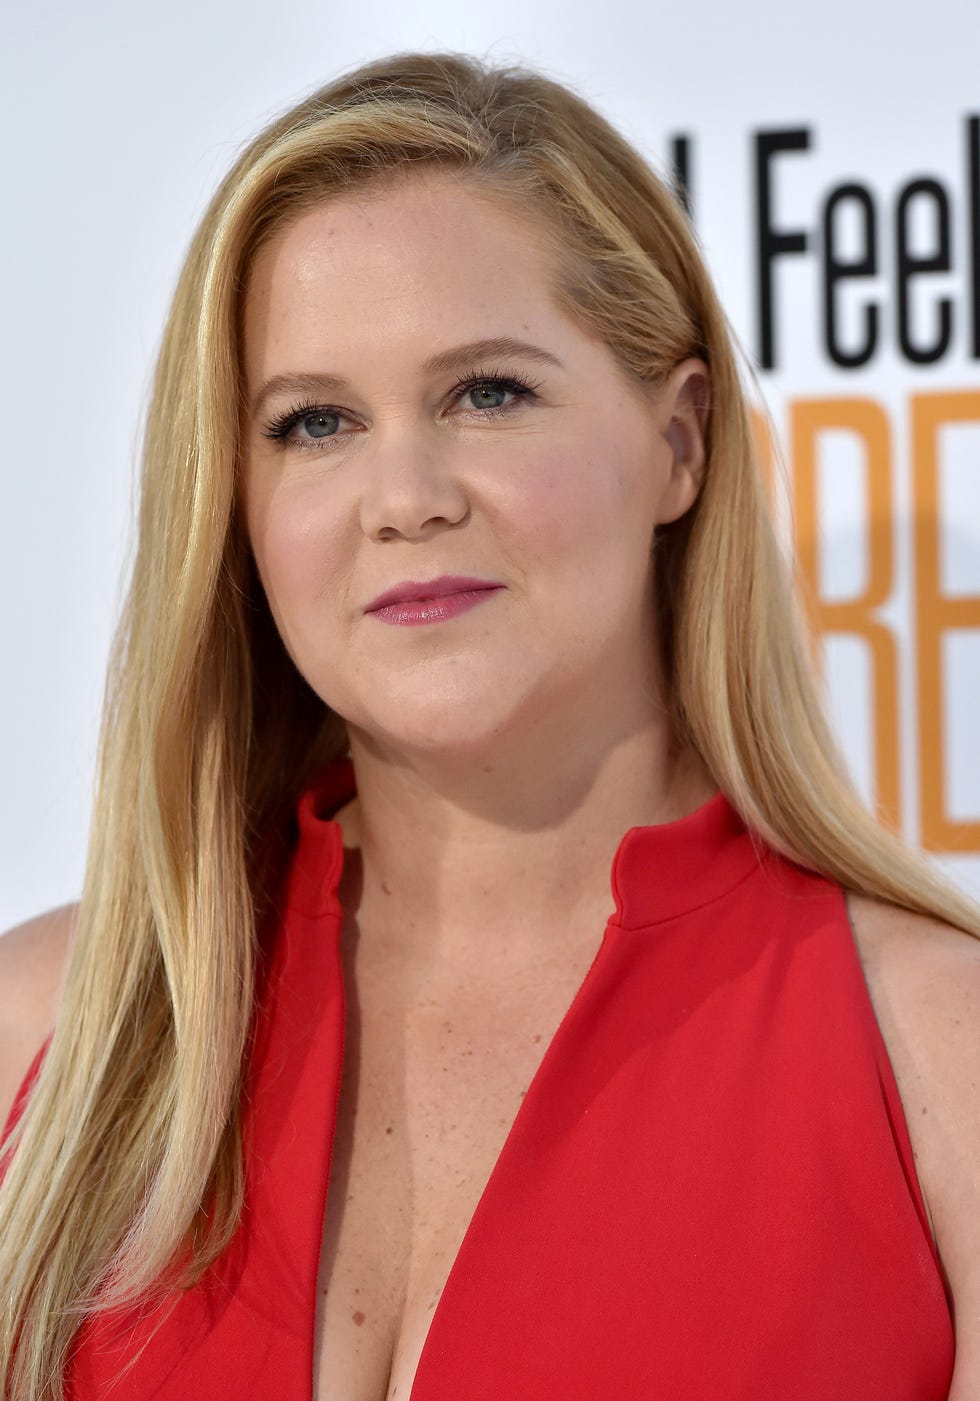 westwood, ca   april 17  actress amy schumer arrives at the premiere of stx films i feel pretty at westwood village theatre on april 17, 2018 in westwood, california  photo by axellebauer griffinfilmmagic